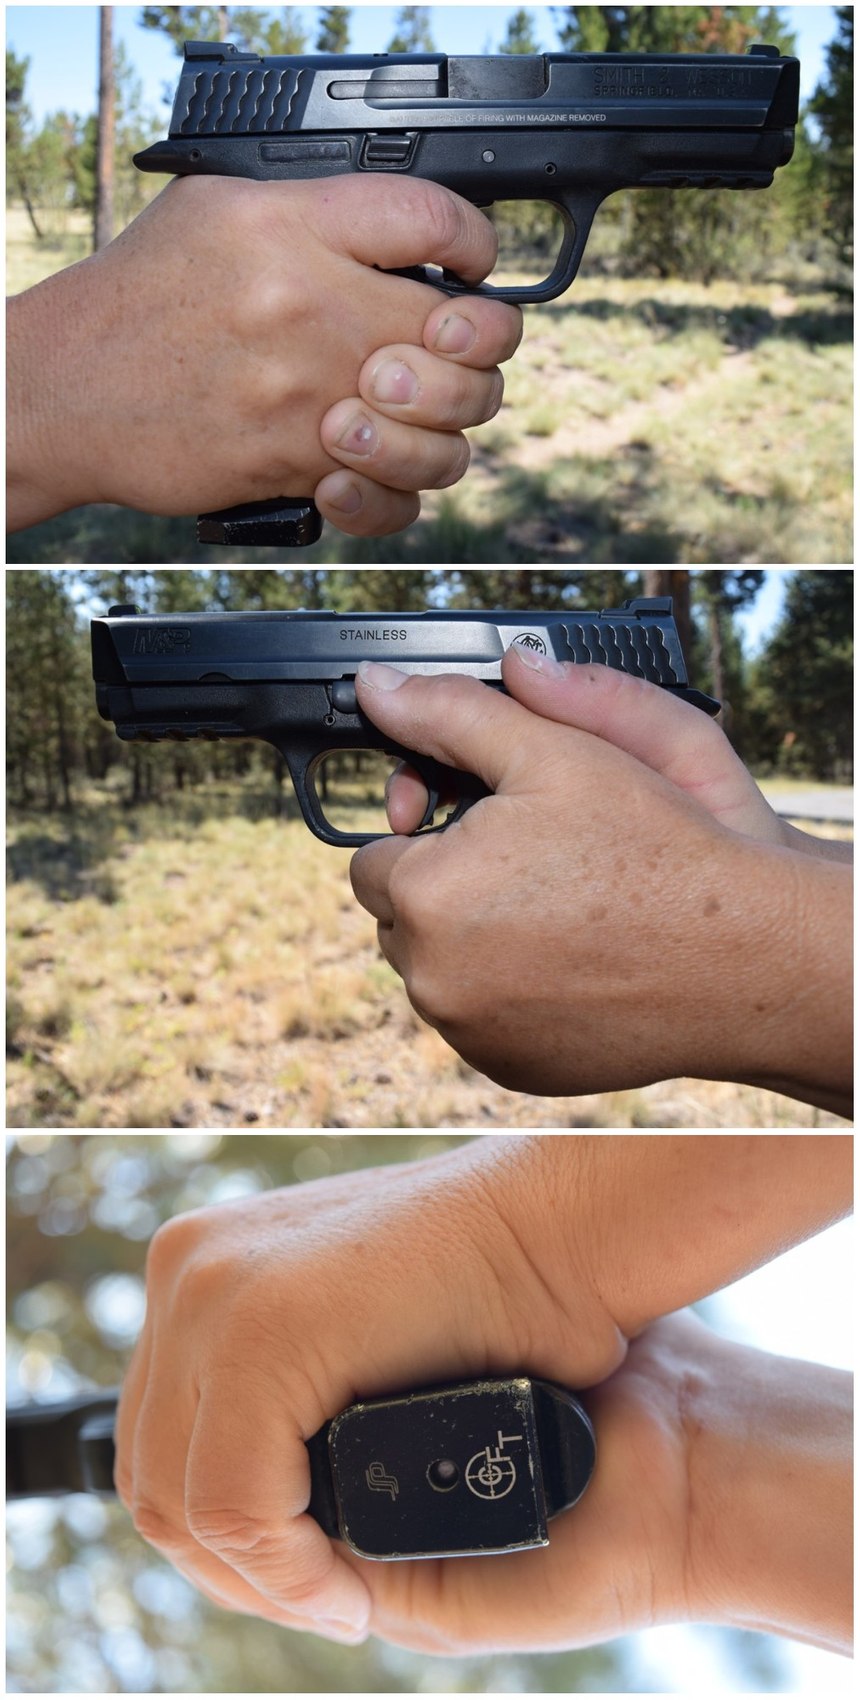 When you examine the grip from the bottom of the pistol looking up, there shouldn't be a gap on the grip of the gun between the thumbs or the heel of either hand. The goal is to obtain full 360? coverage around the entire grip of the gun. If there's any gap in the grip, the hole will allow the energy from recoil to travel down that direction causing a perceived increase in recoil and more movement of the sights while firing.